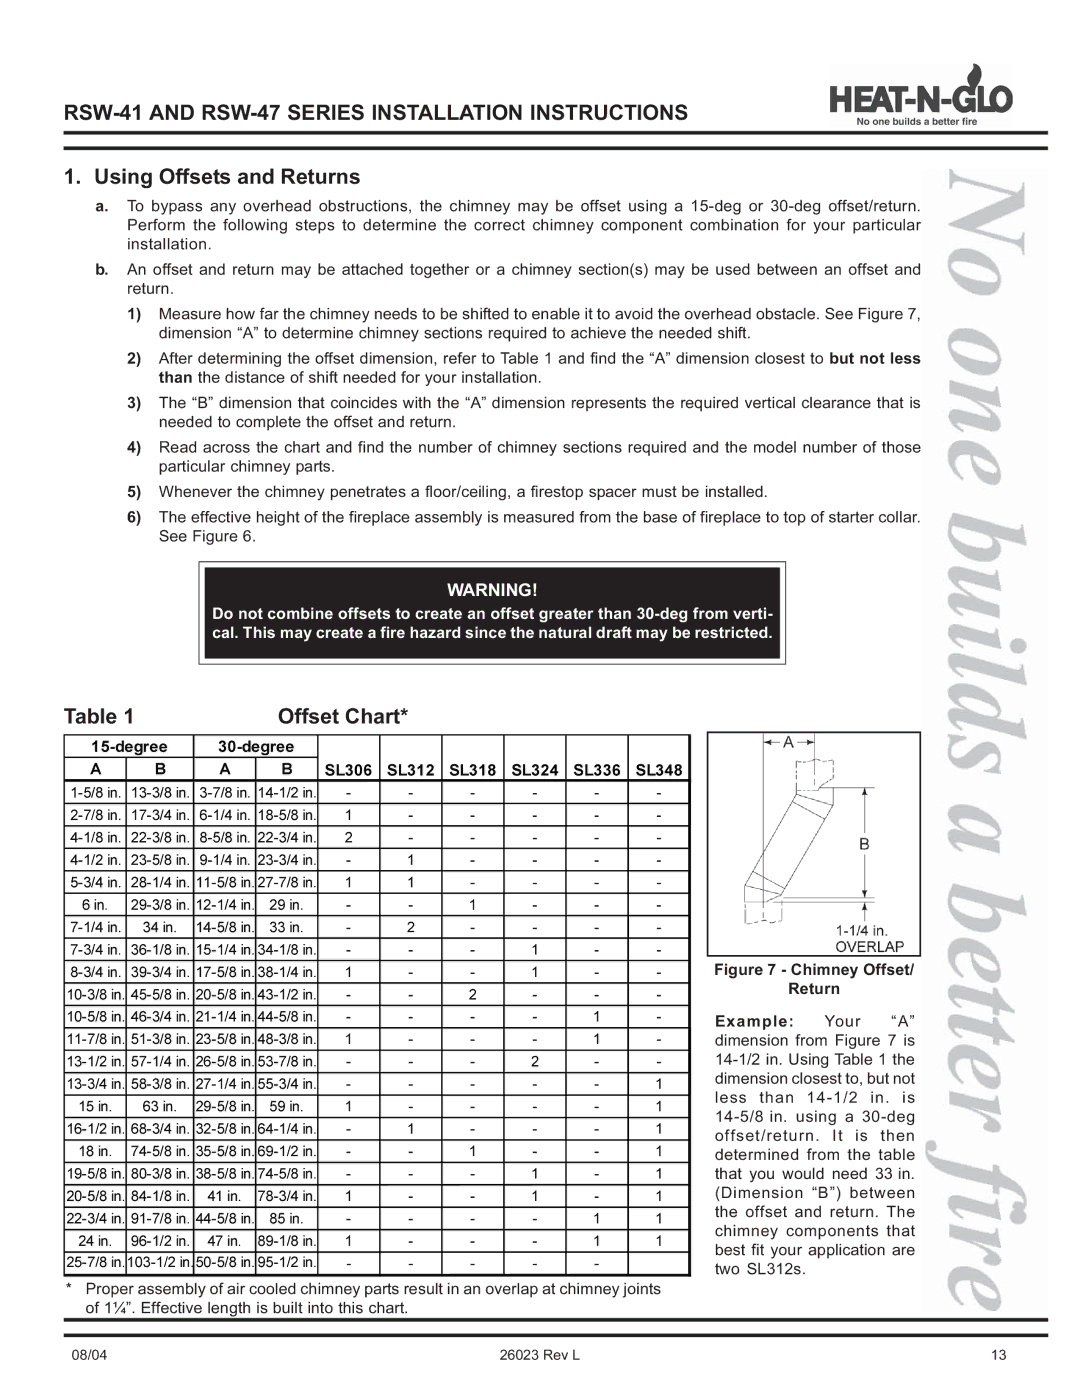 Hearth and Home Technologies RSW-47, RSW-41 manual Using Offsets and Returns, Offset Chart 